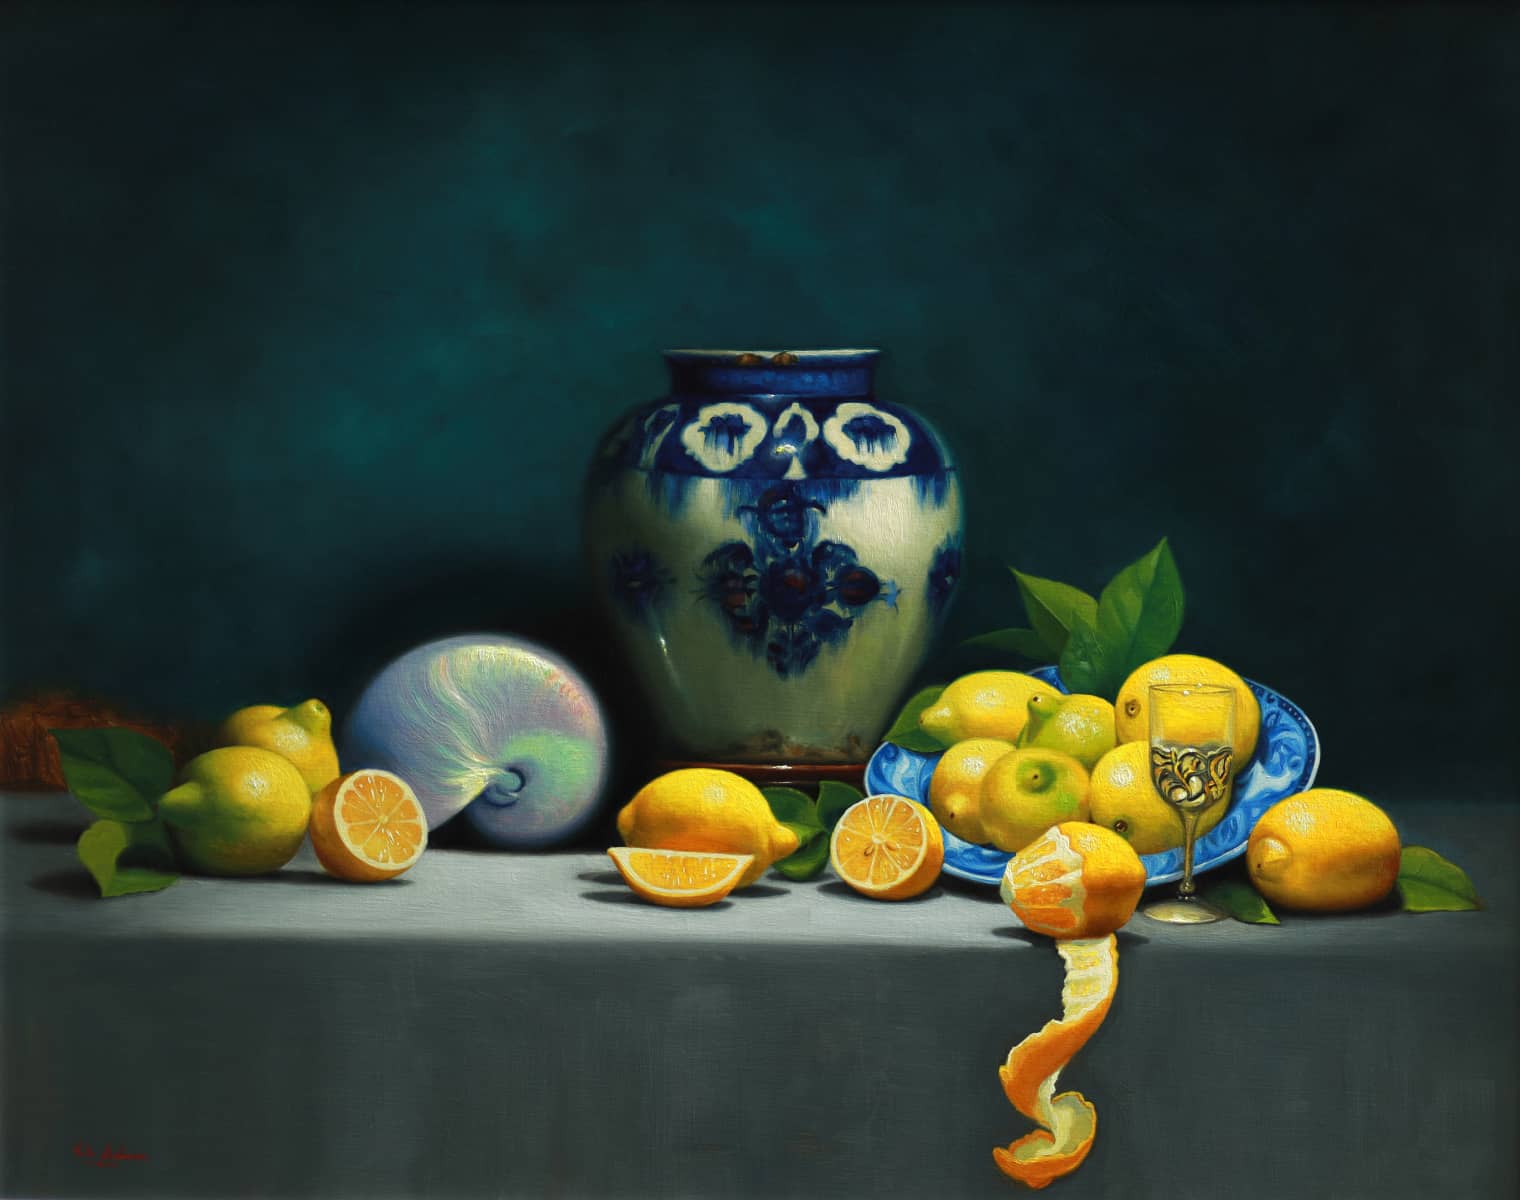 Vicki Sullivan Painting ~ 'Blue and White Persian Vase with Lemons' - Curate Art & Design Gallery Sorrento, Melbourne